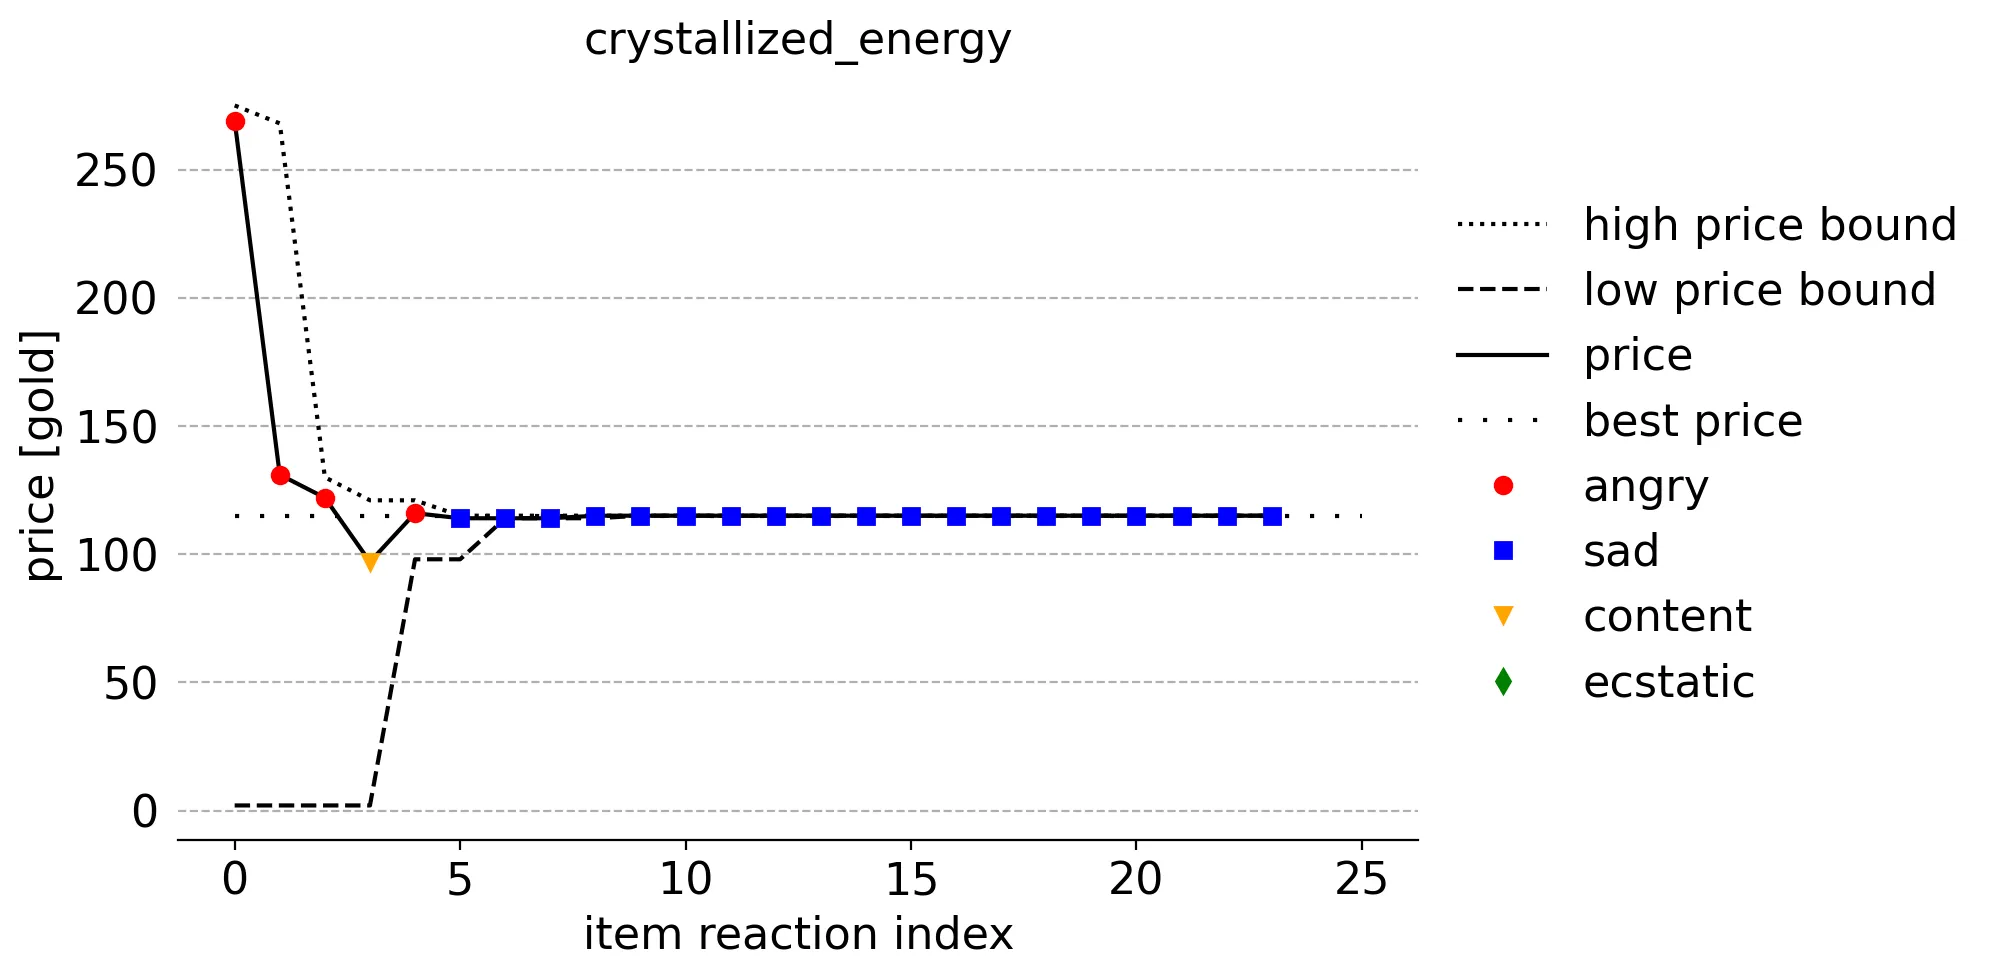 
    Figure for crystallized energy showing the price and reaction for every reaction of the item as
    it occurs.
    Includes algorithm's understanding of ideal price range BEFORE the reaction and ideal price.
    Shows 3 decreasing angry reactions, each limiting upper bound in next step, then a content
    reaction that limits the lower bound in the next step, then an angry reaction, and then a sad
    reaction at the ideal price, with all remaining sad reactions at that price.
  